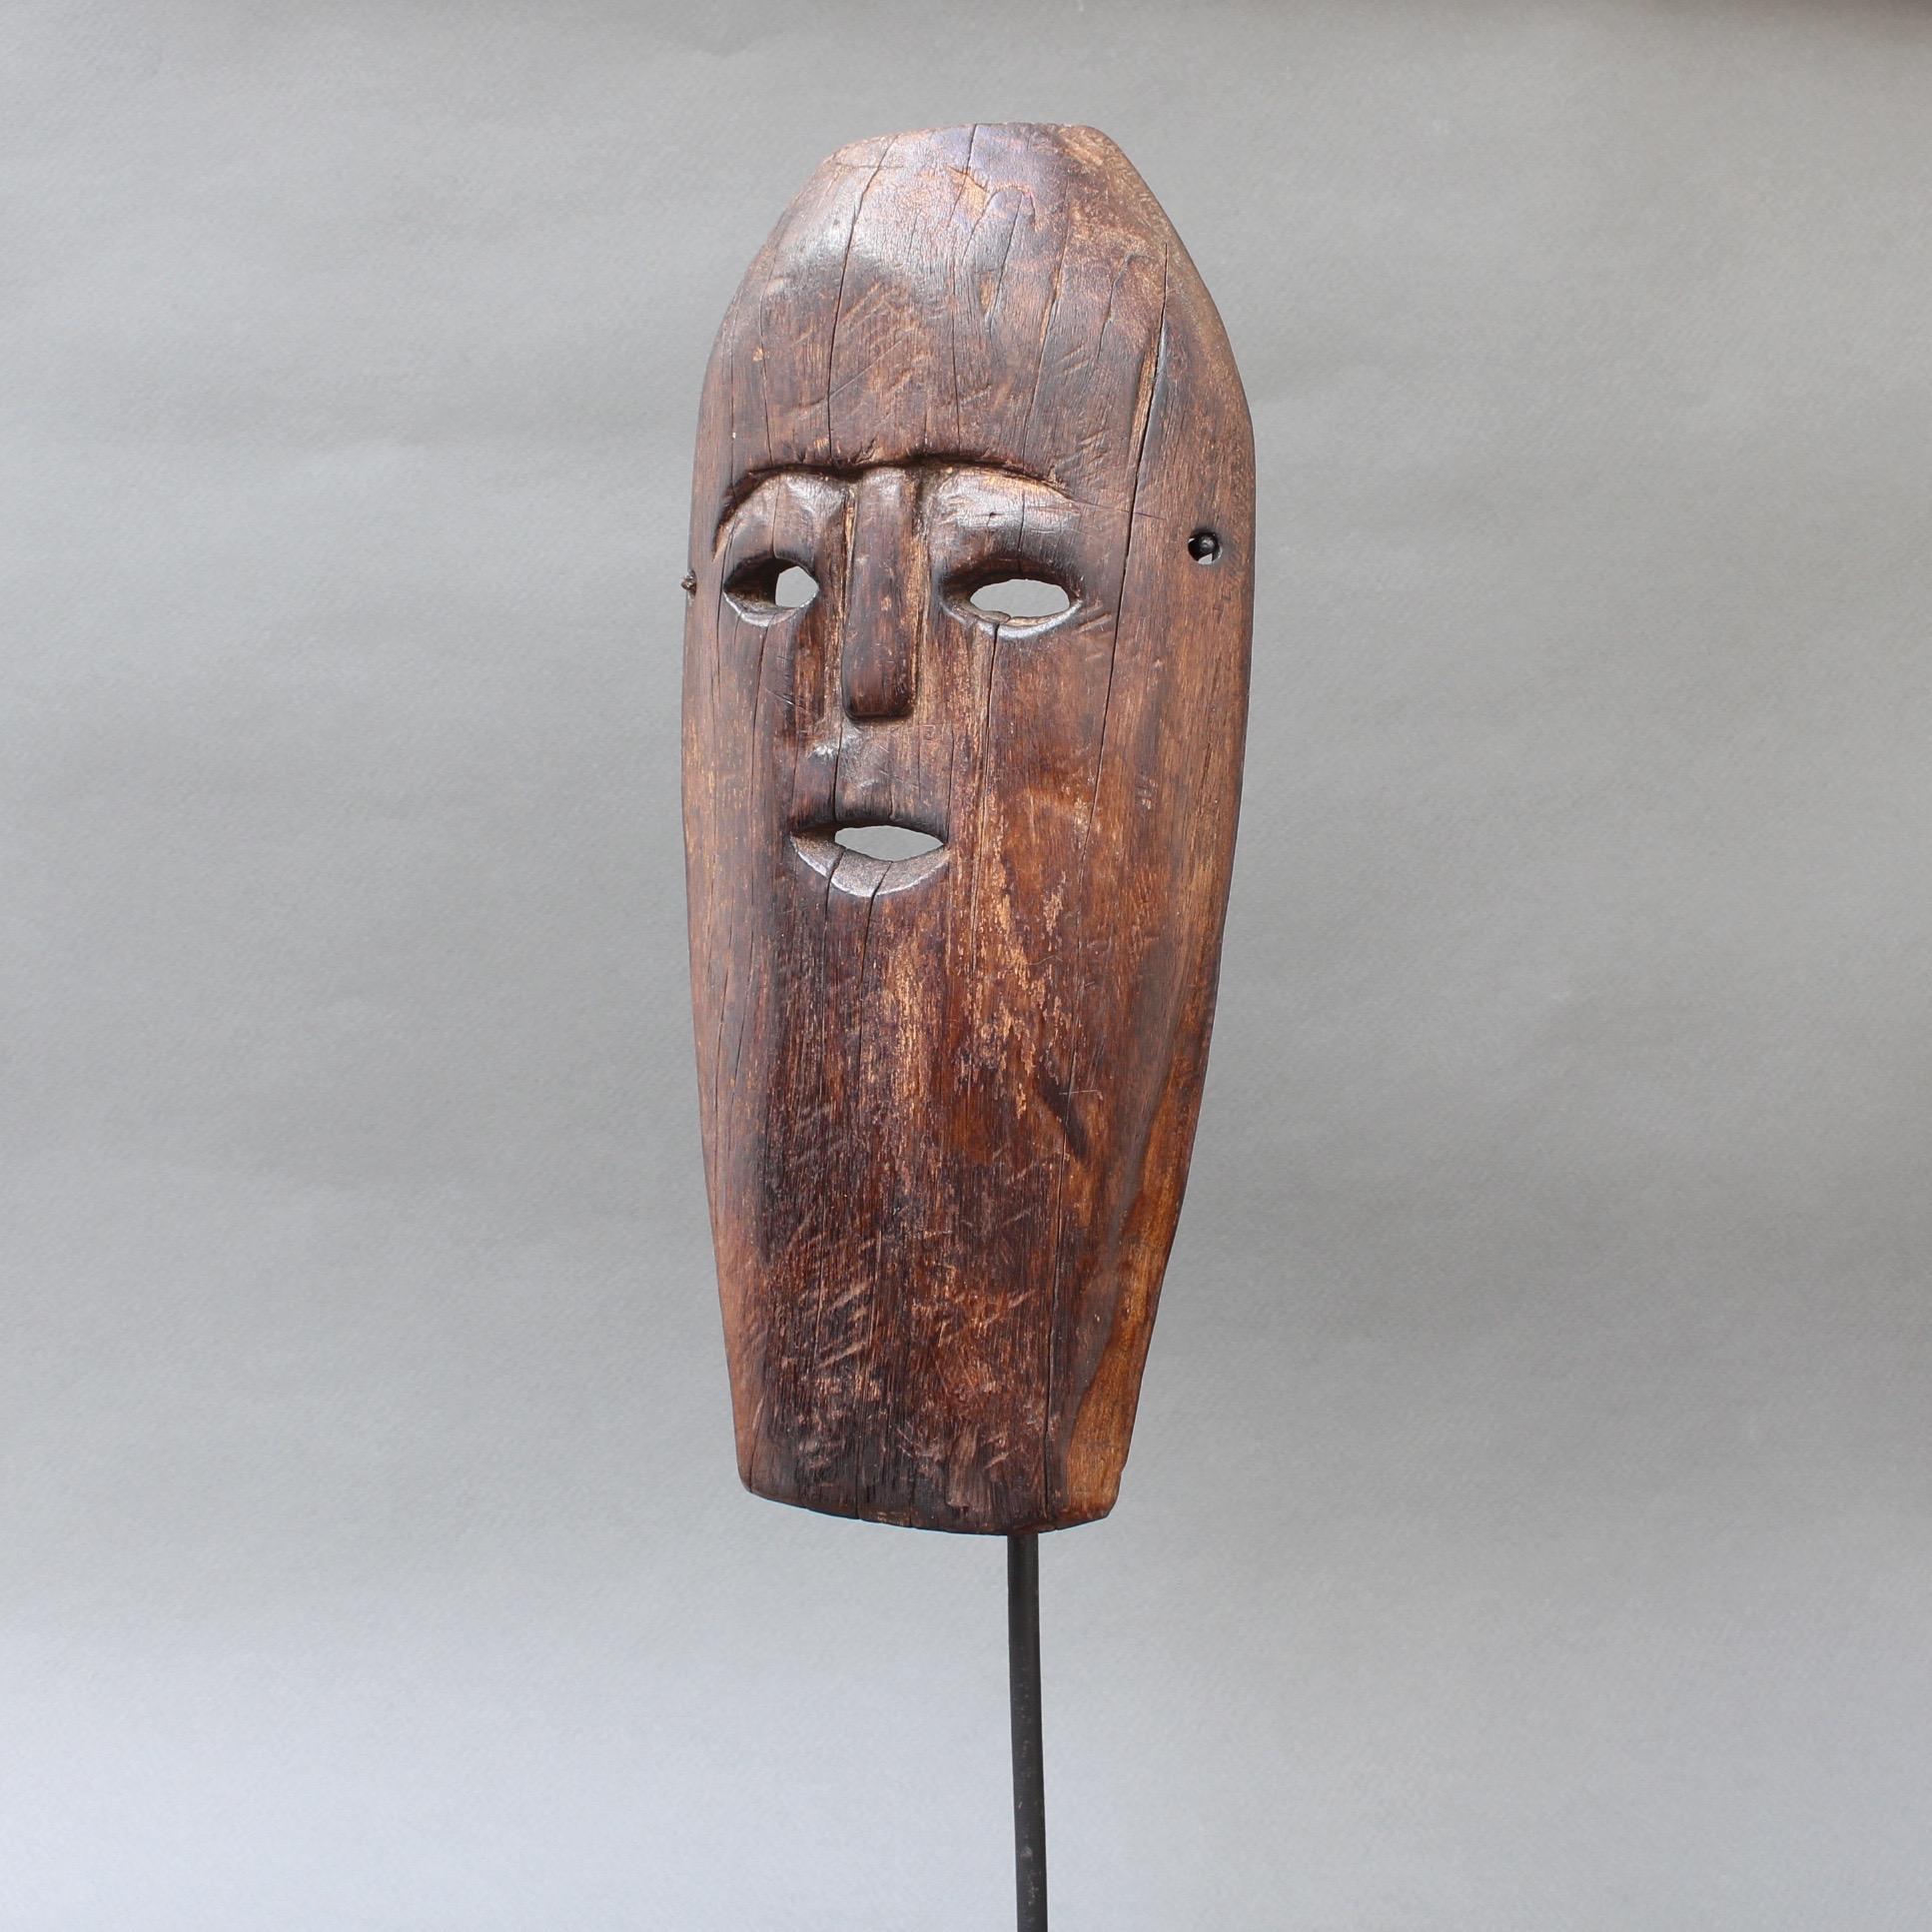 20th Century Midcentury Sculpted Wooden Traditional Mask from Timor Island, Indonesia